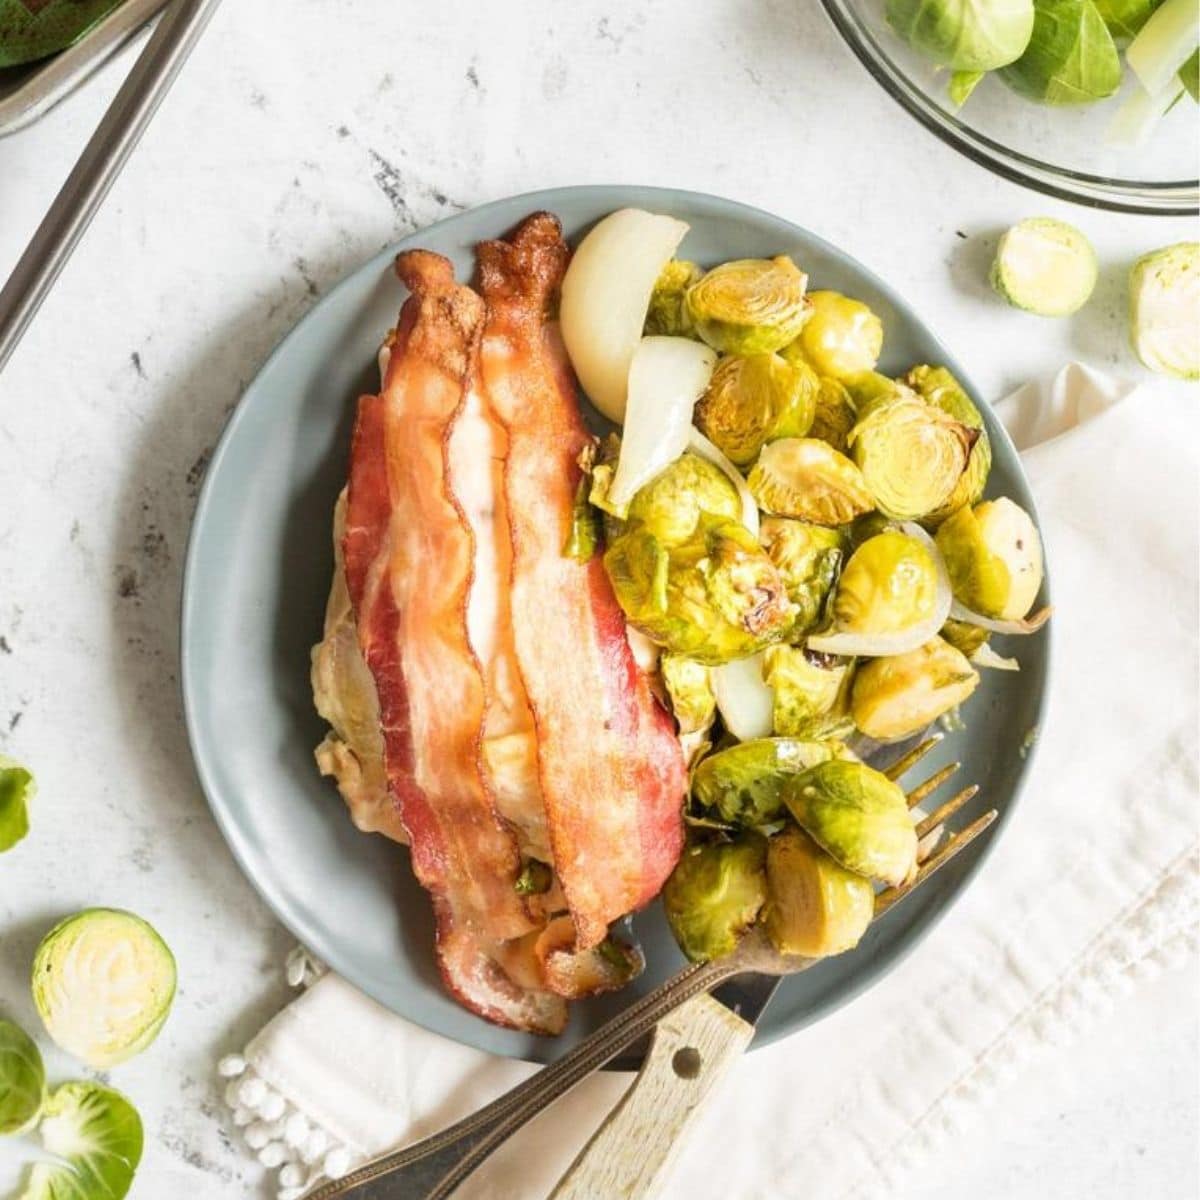 chicken with bacon on top next to brussels sprouts on a grey plate